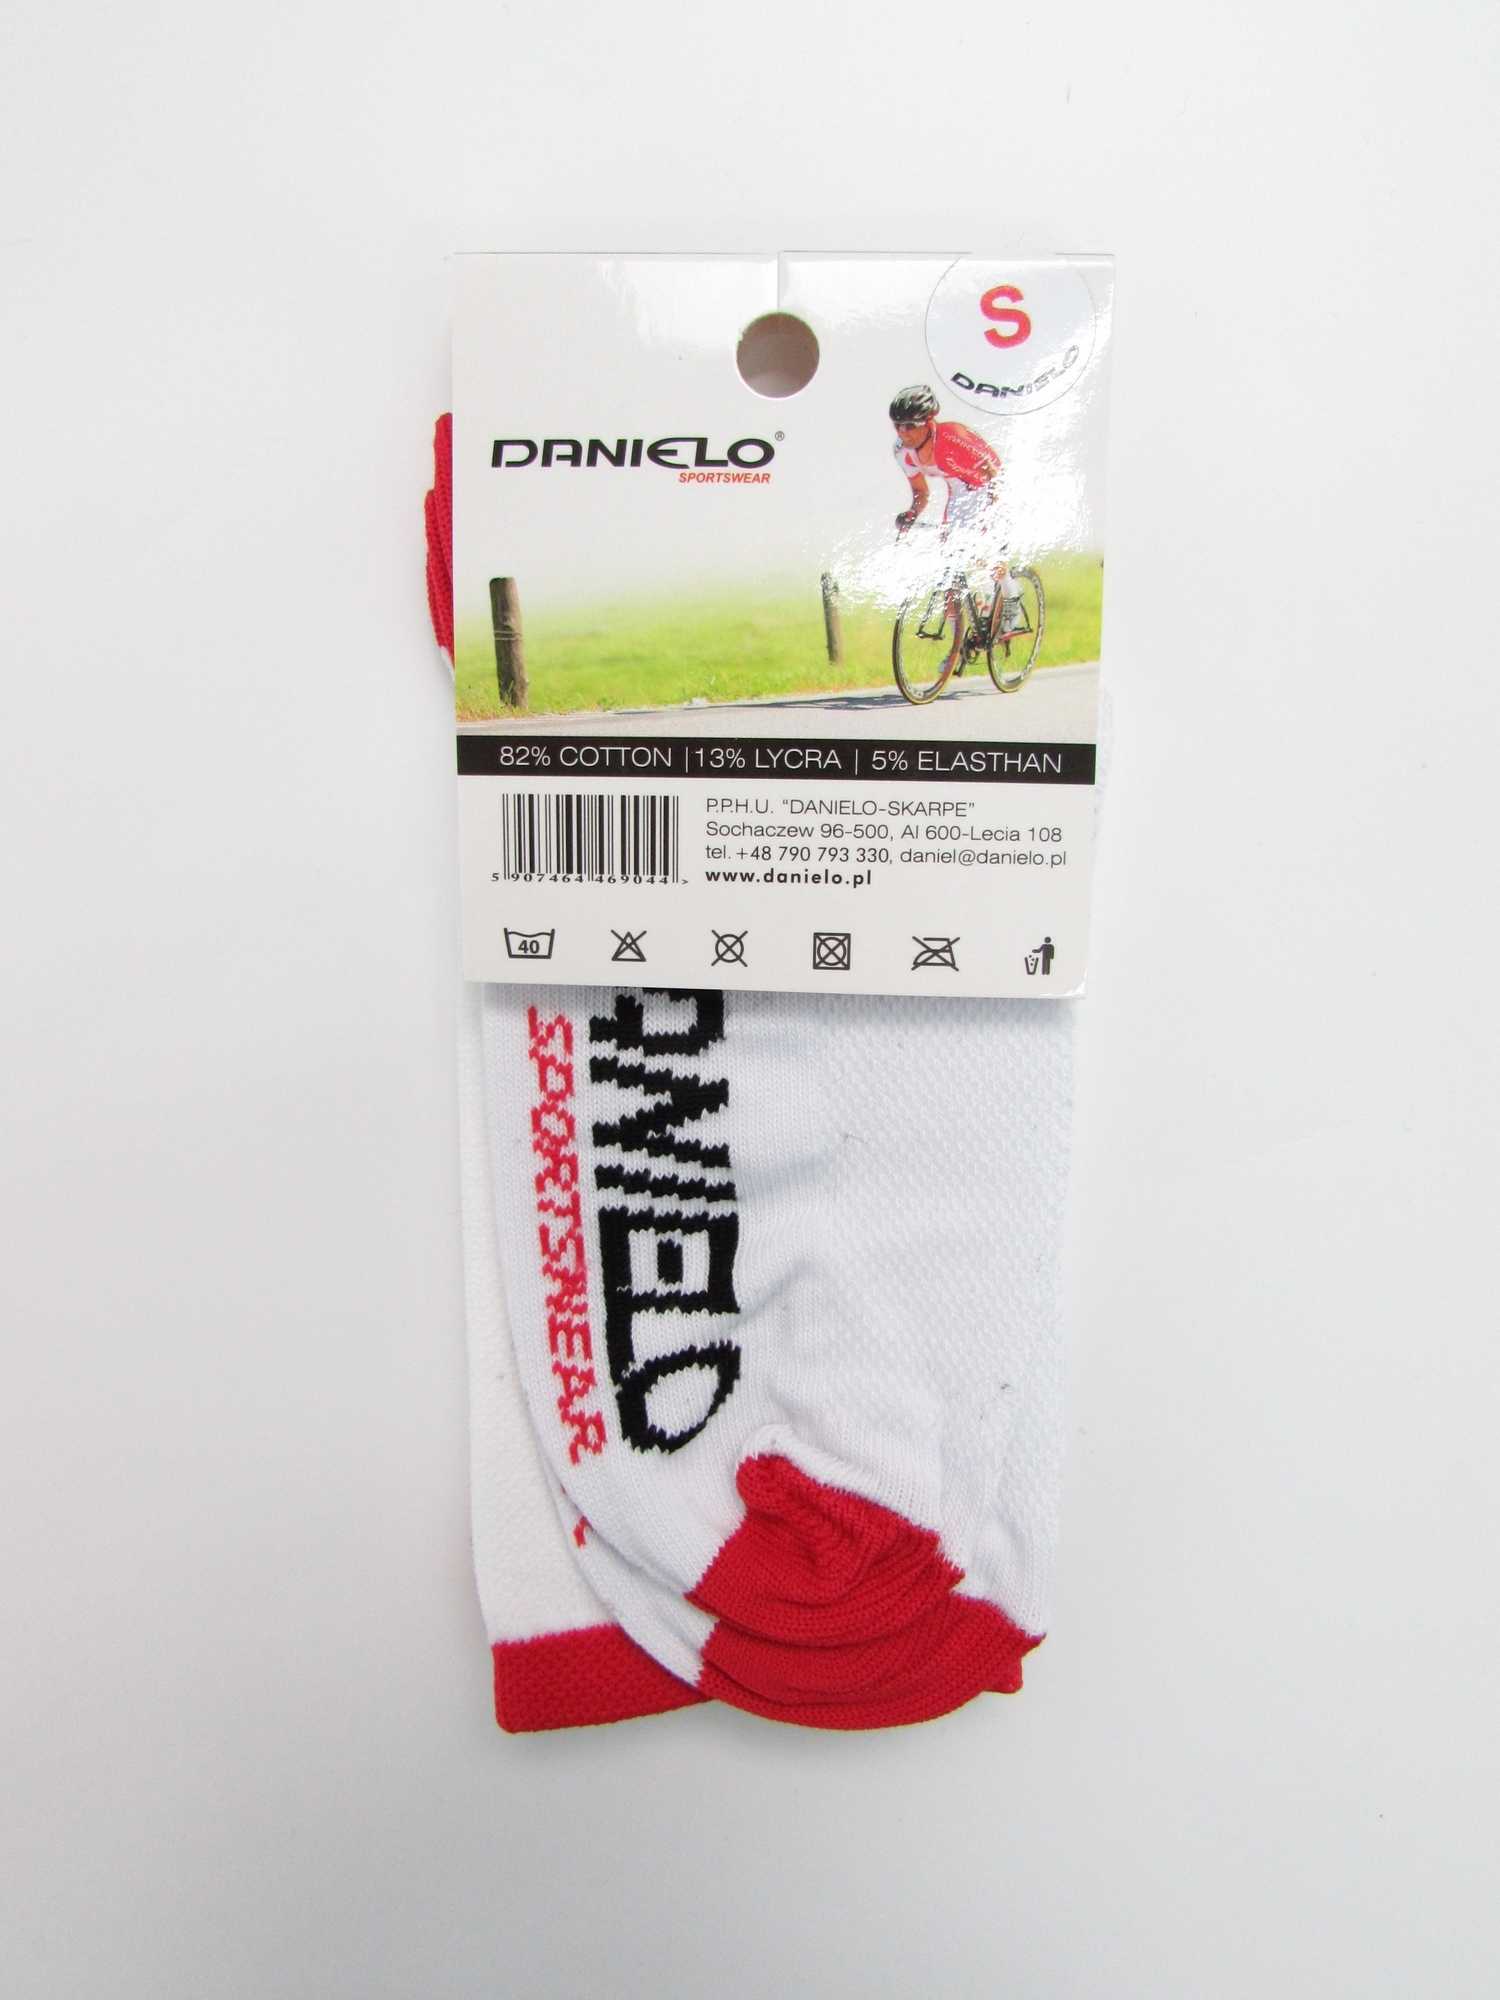 Danielo Professional Cycling Socks white/red size 45-46 (XL)